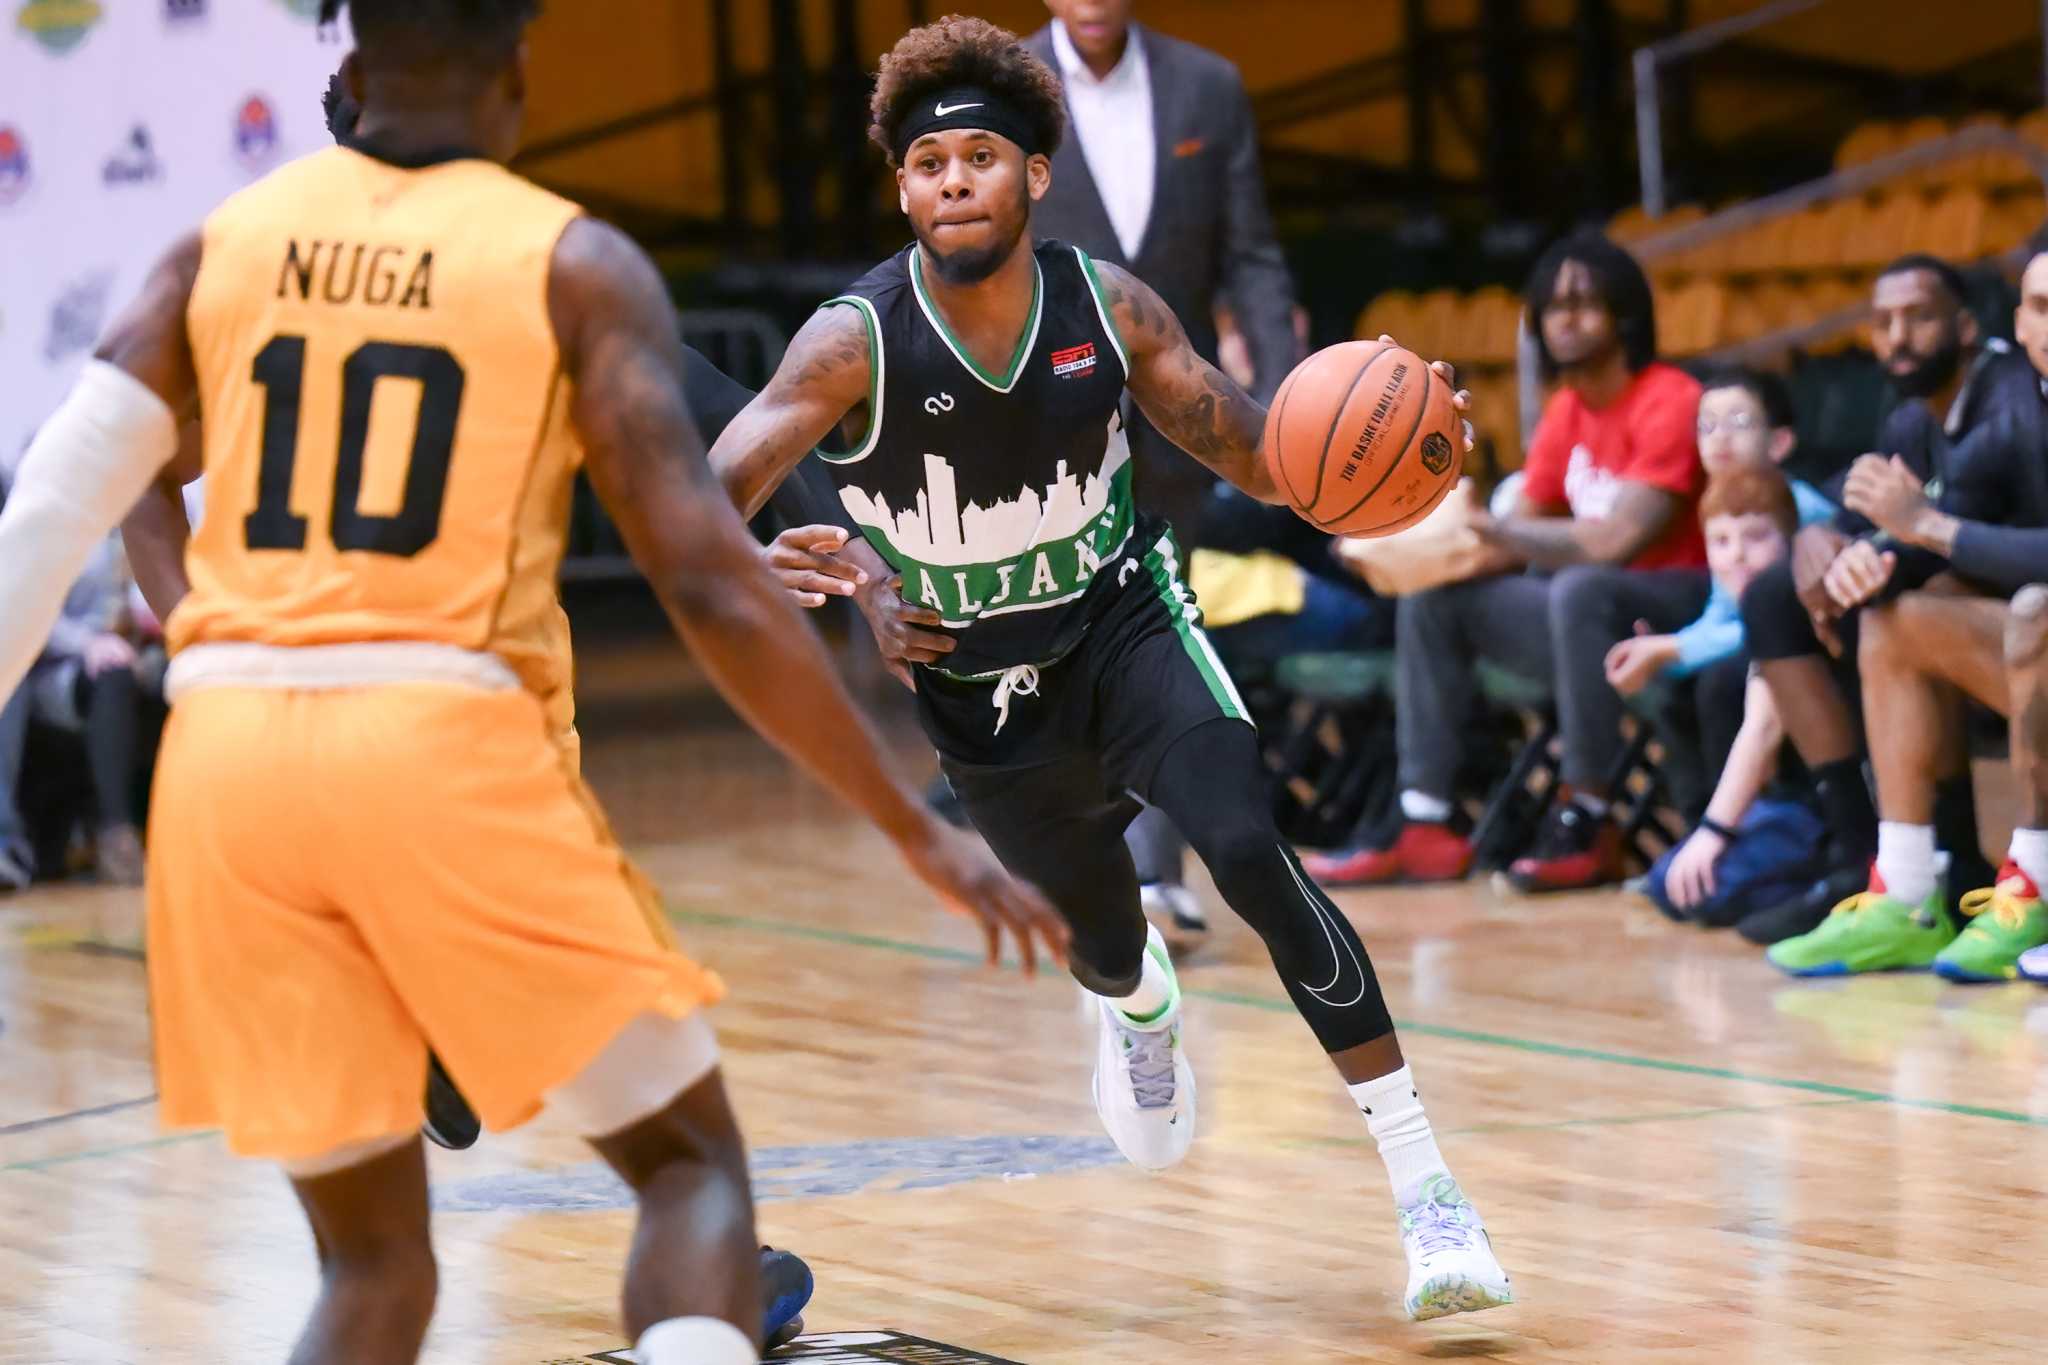 Patroons win in blowout to set up Saturday showdown